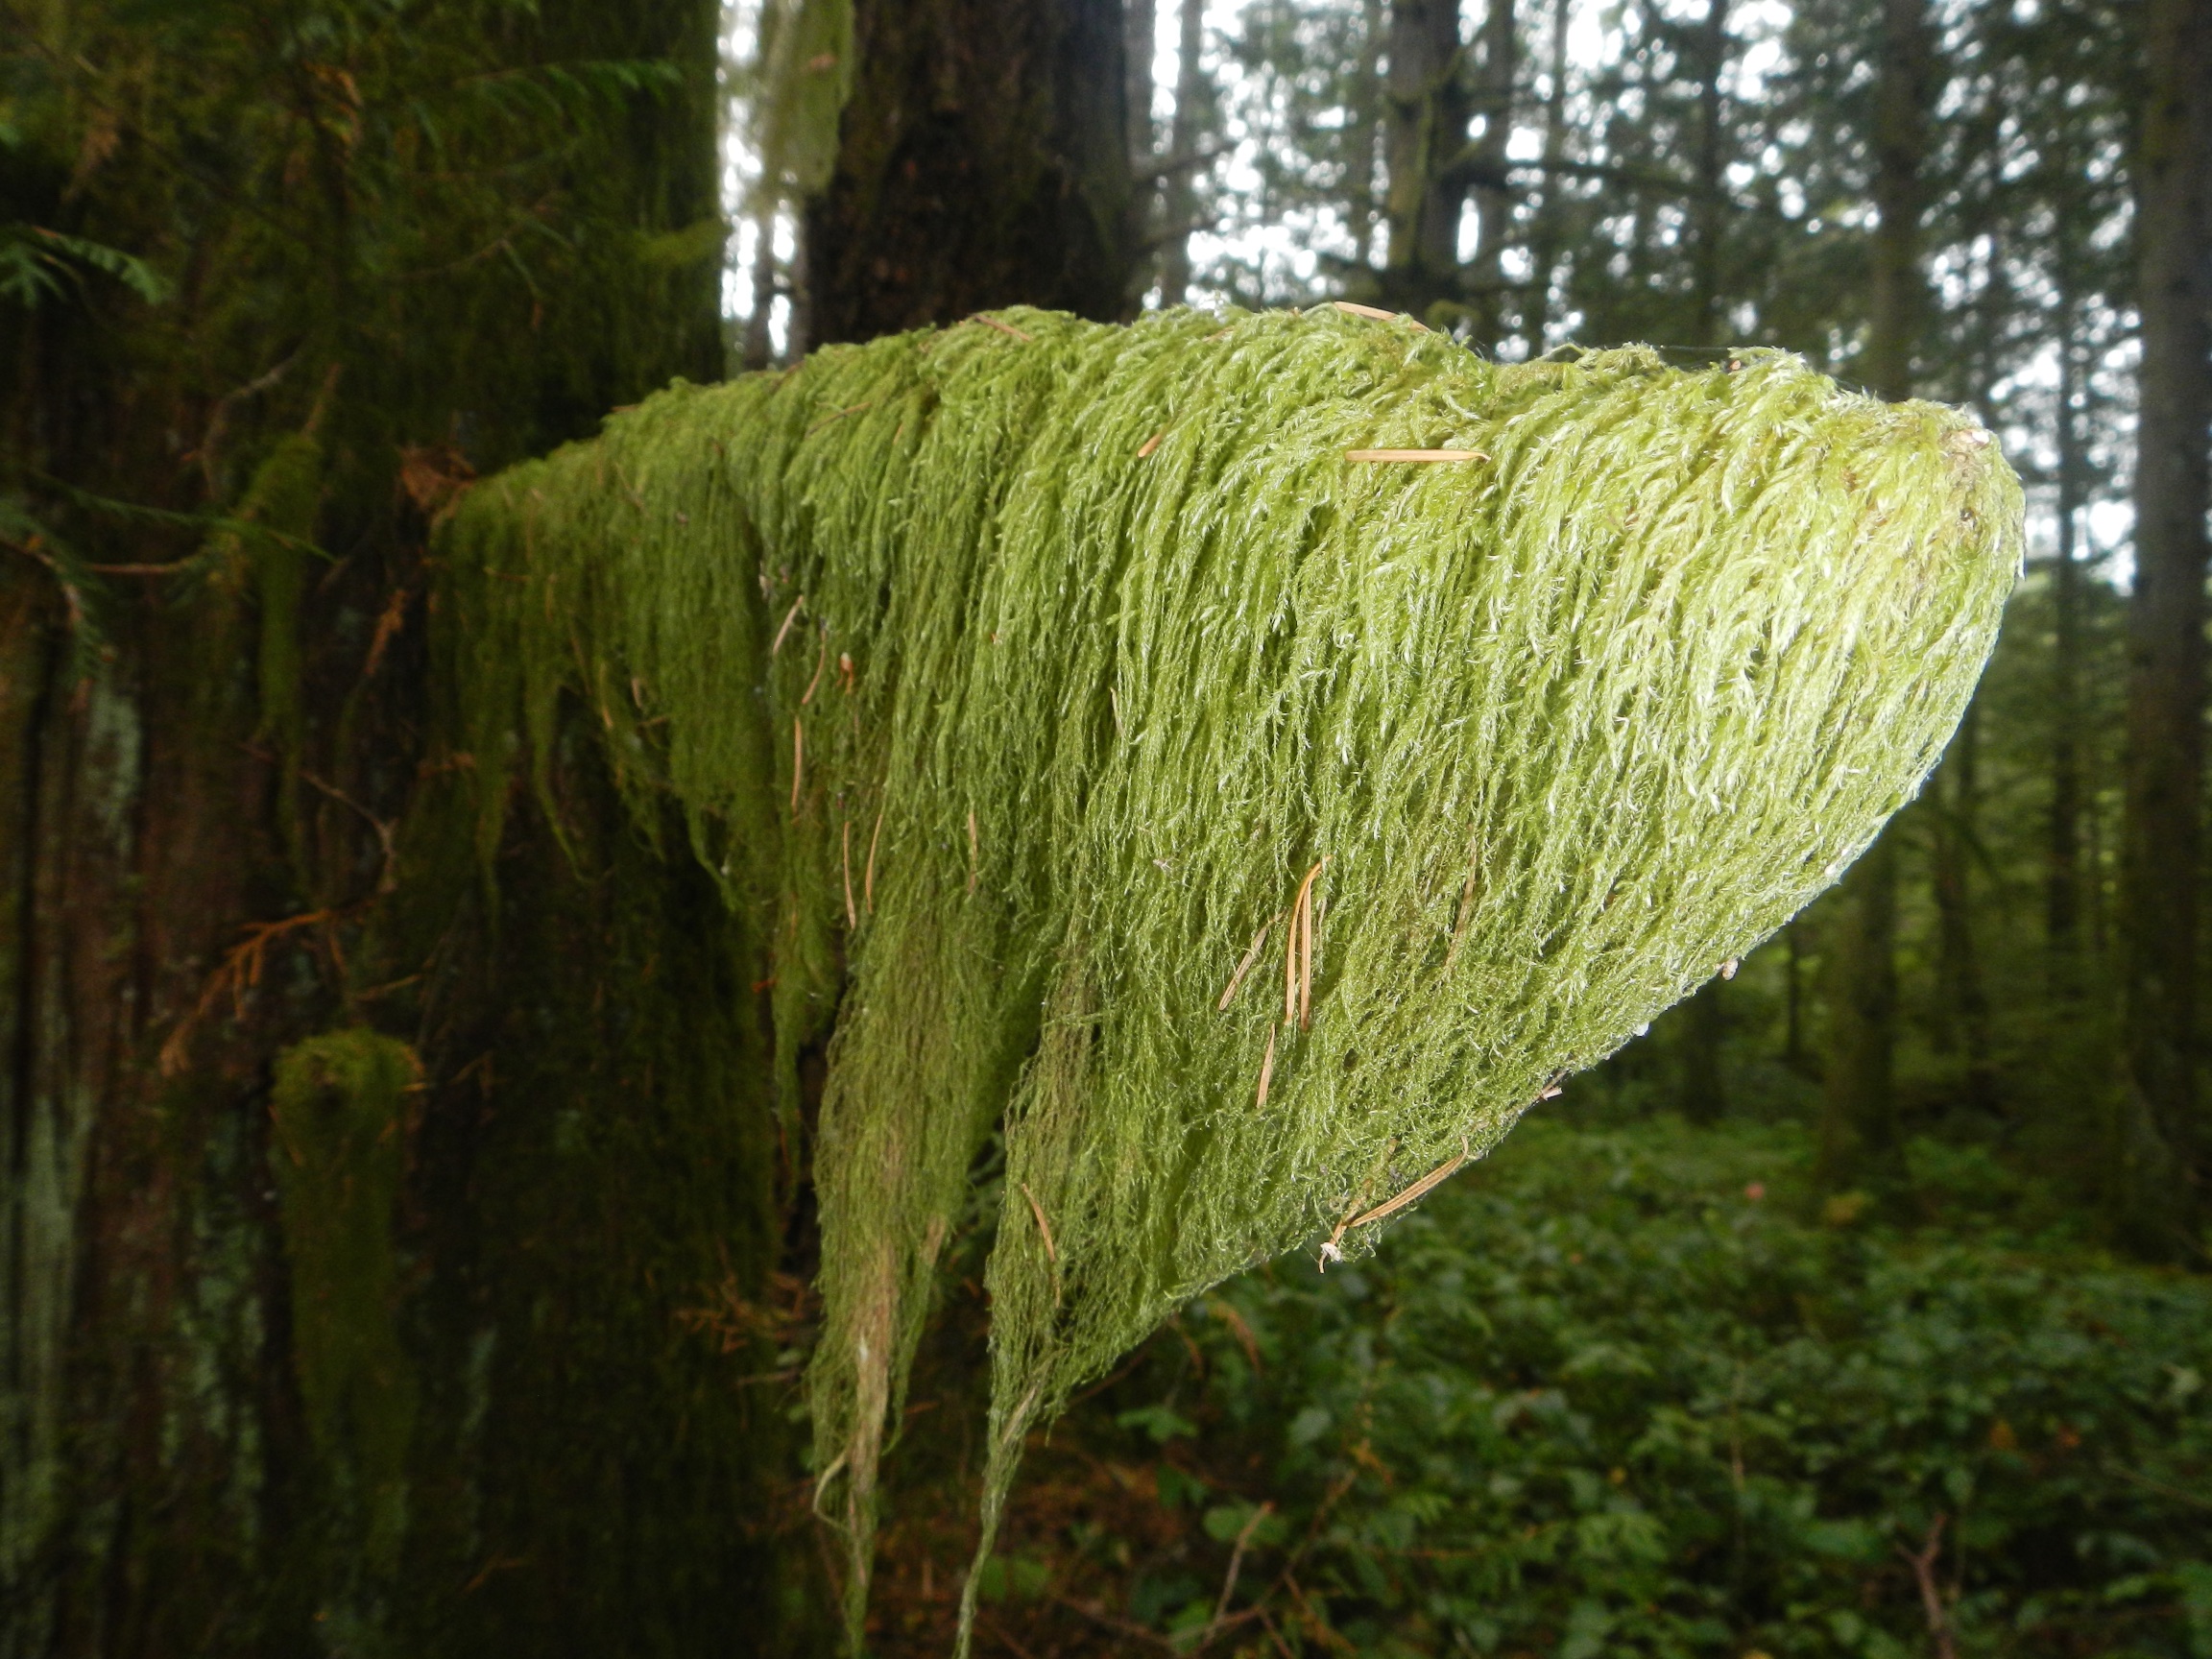  Old man's beard. Nymph Falls, Puntledge R, Courtenay, Vancouver Is, Canada 